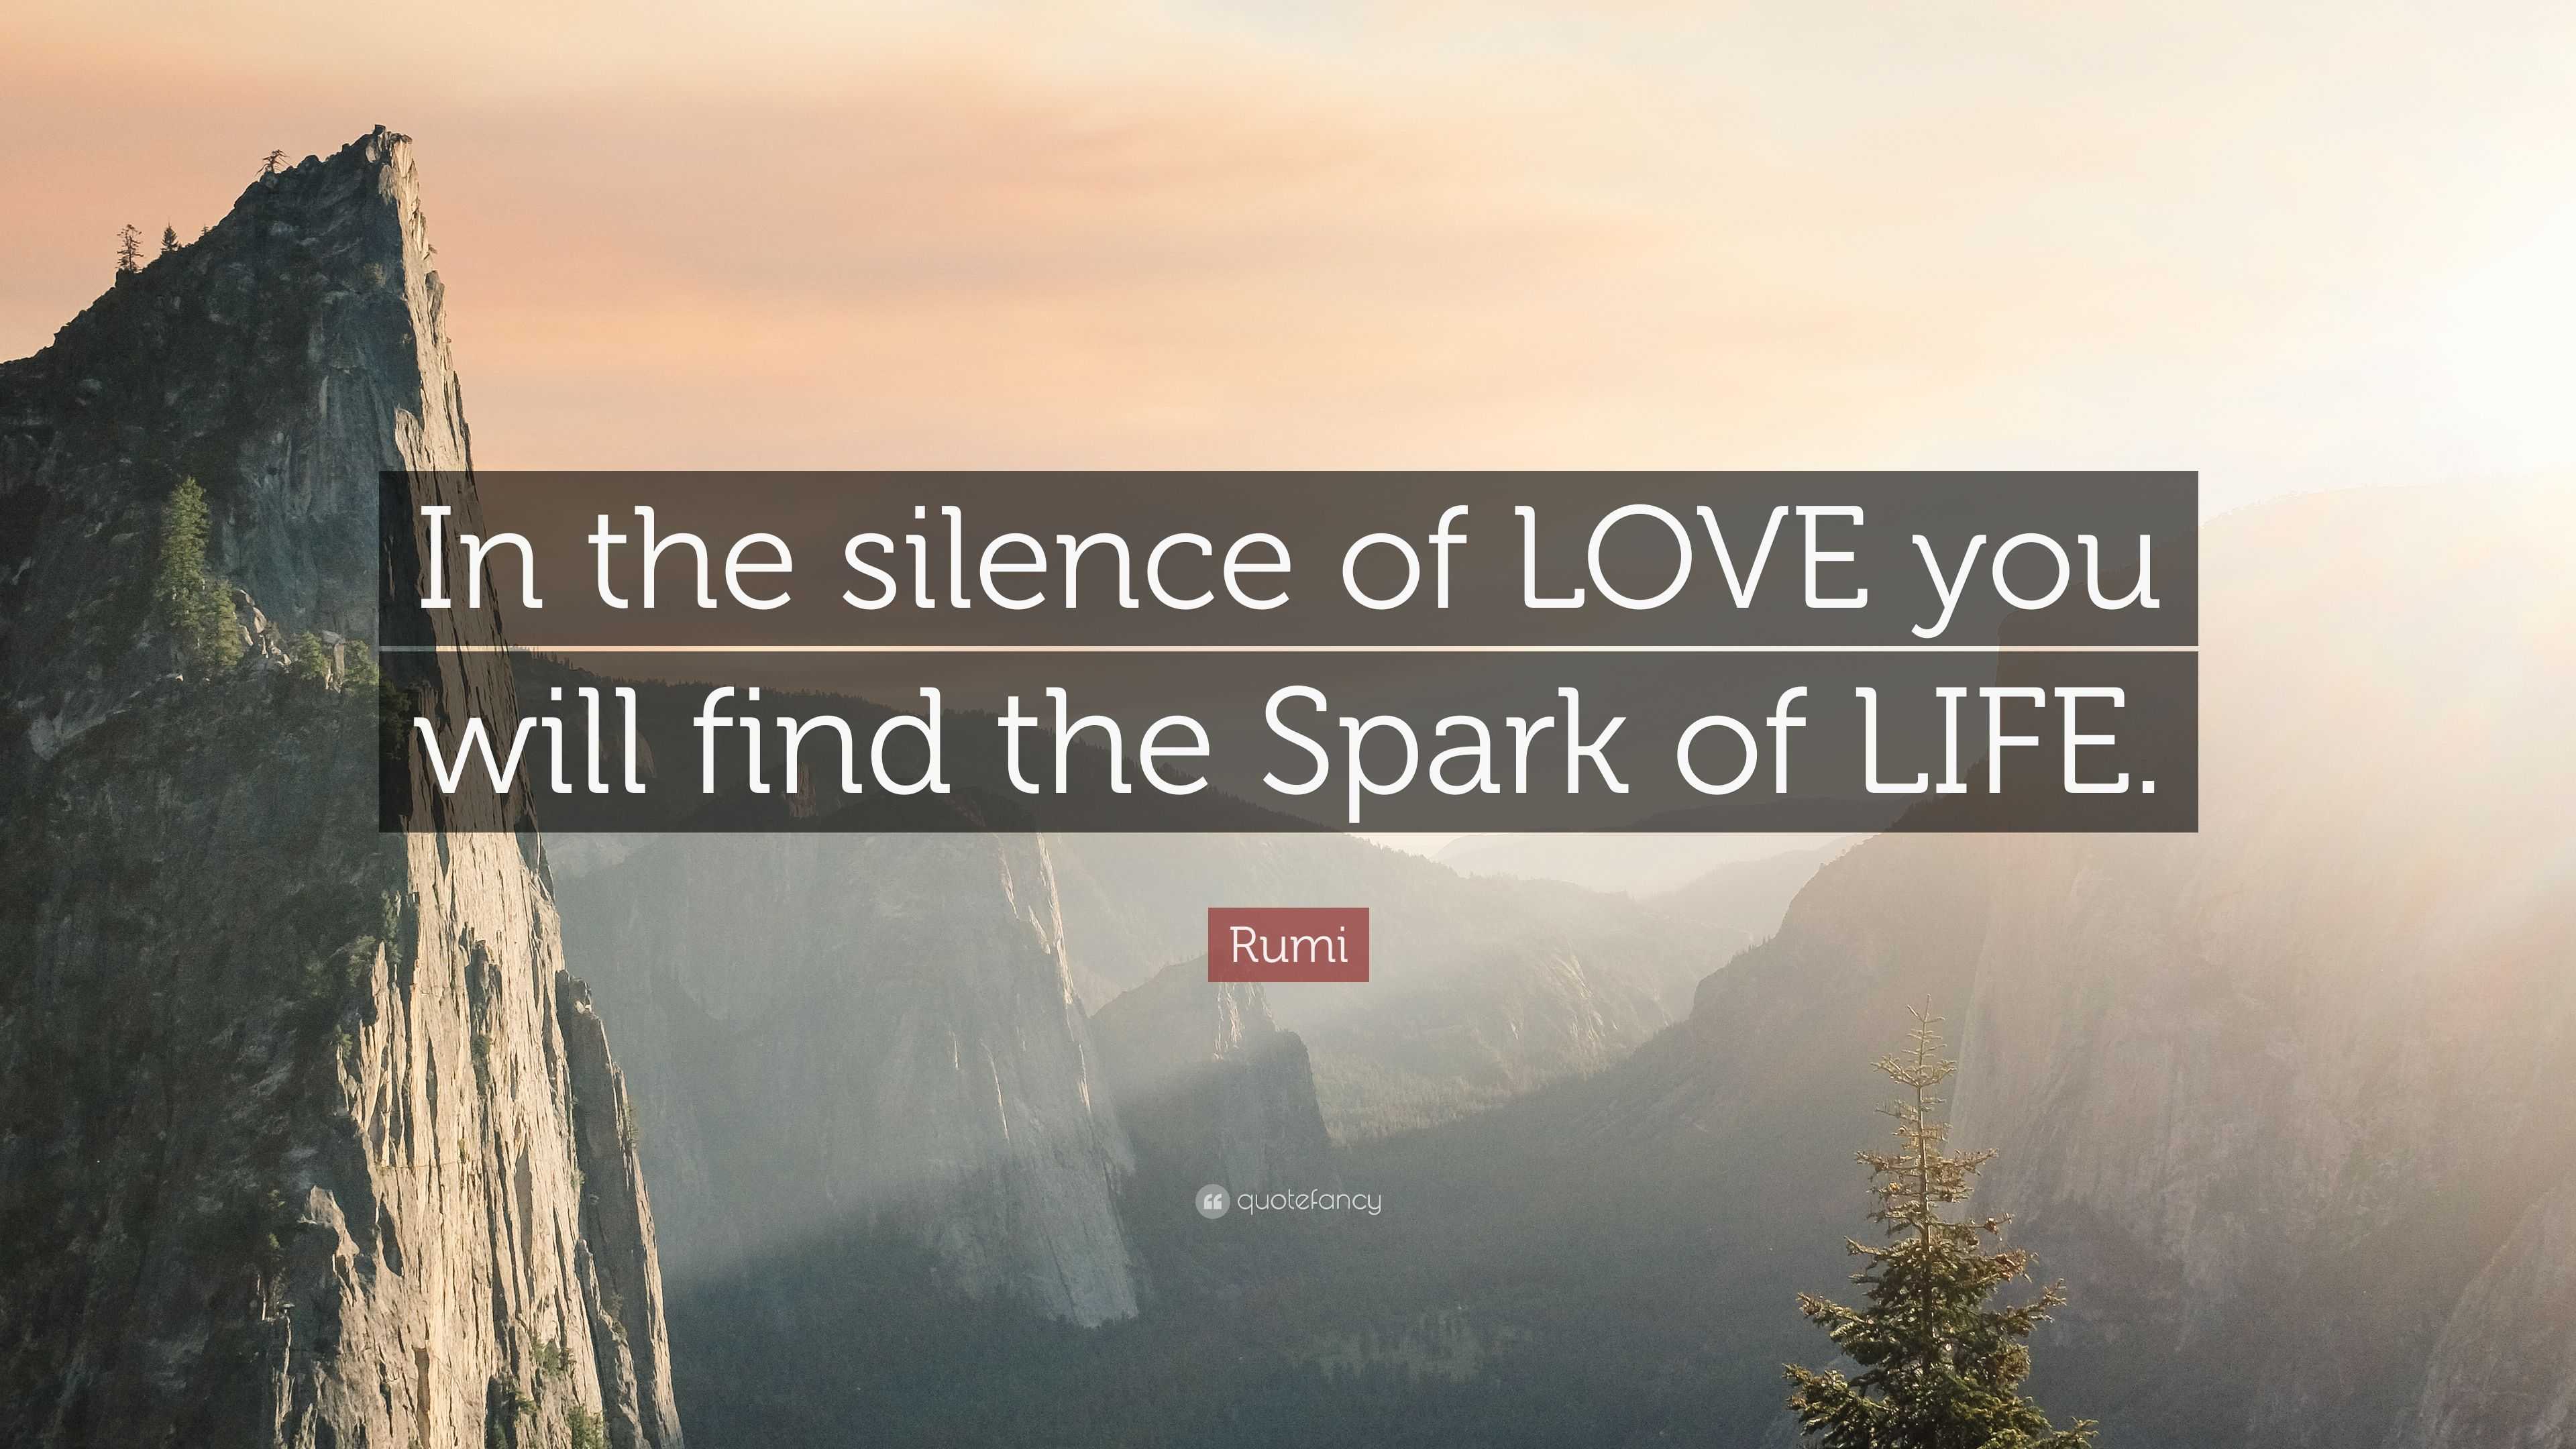 Rumi Quote “In the silence of LOVE you will find the